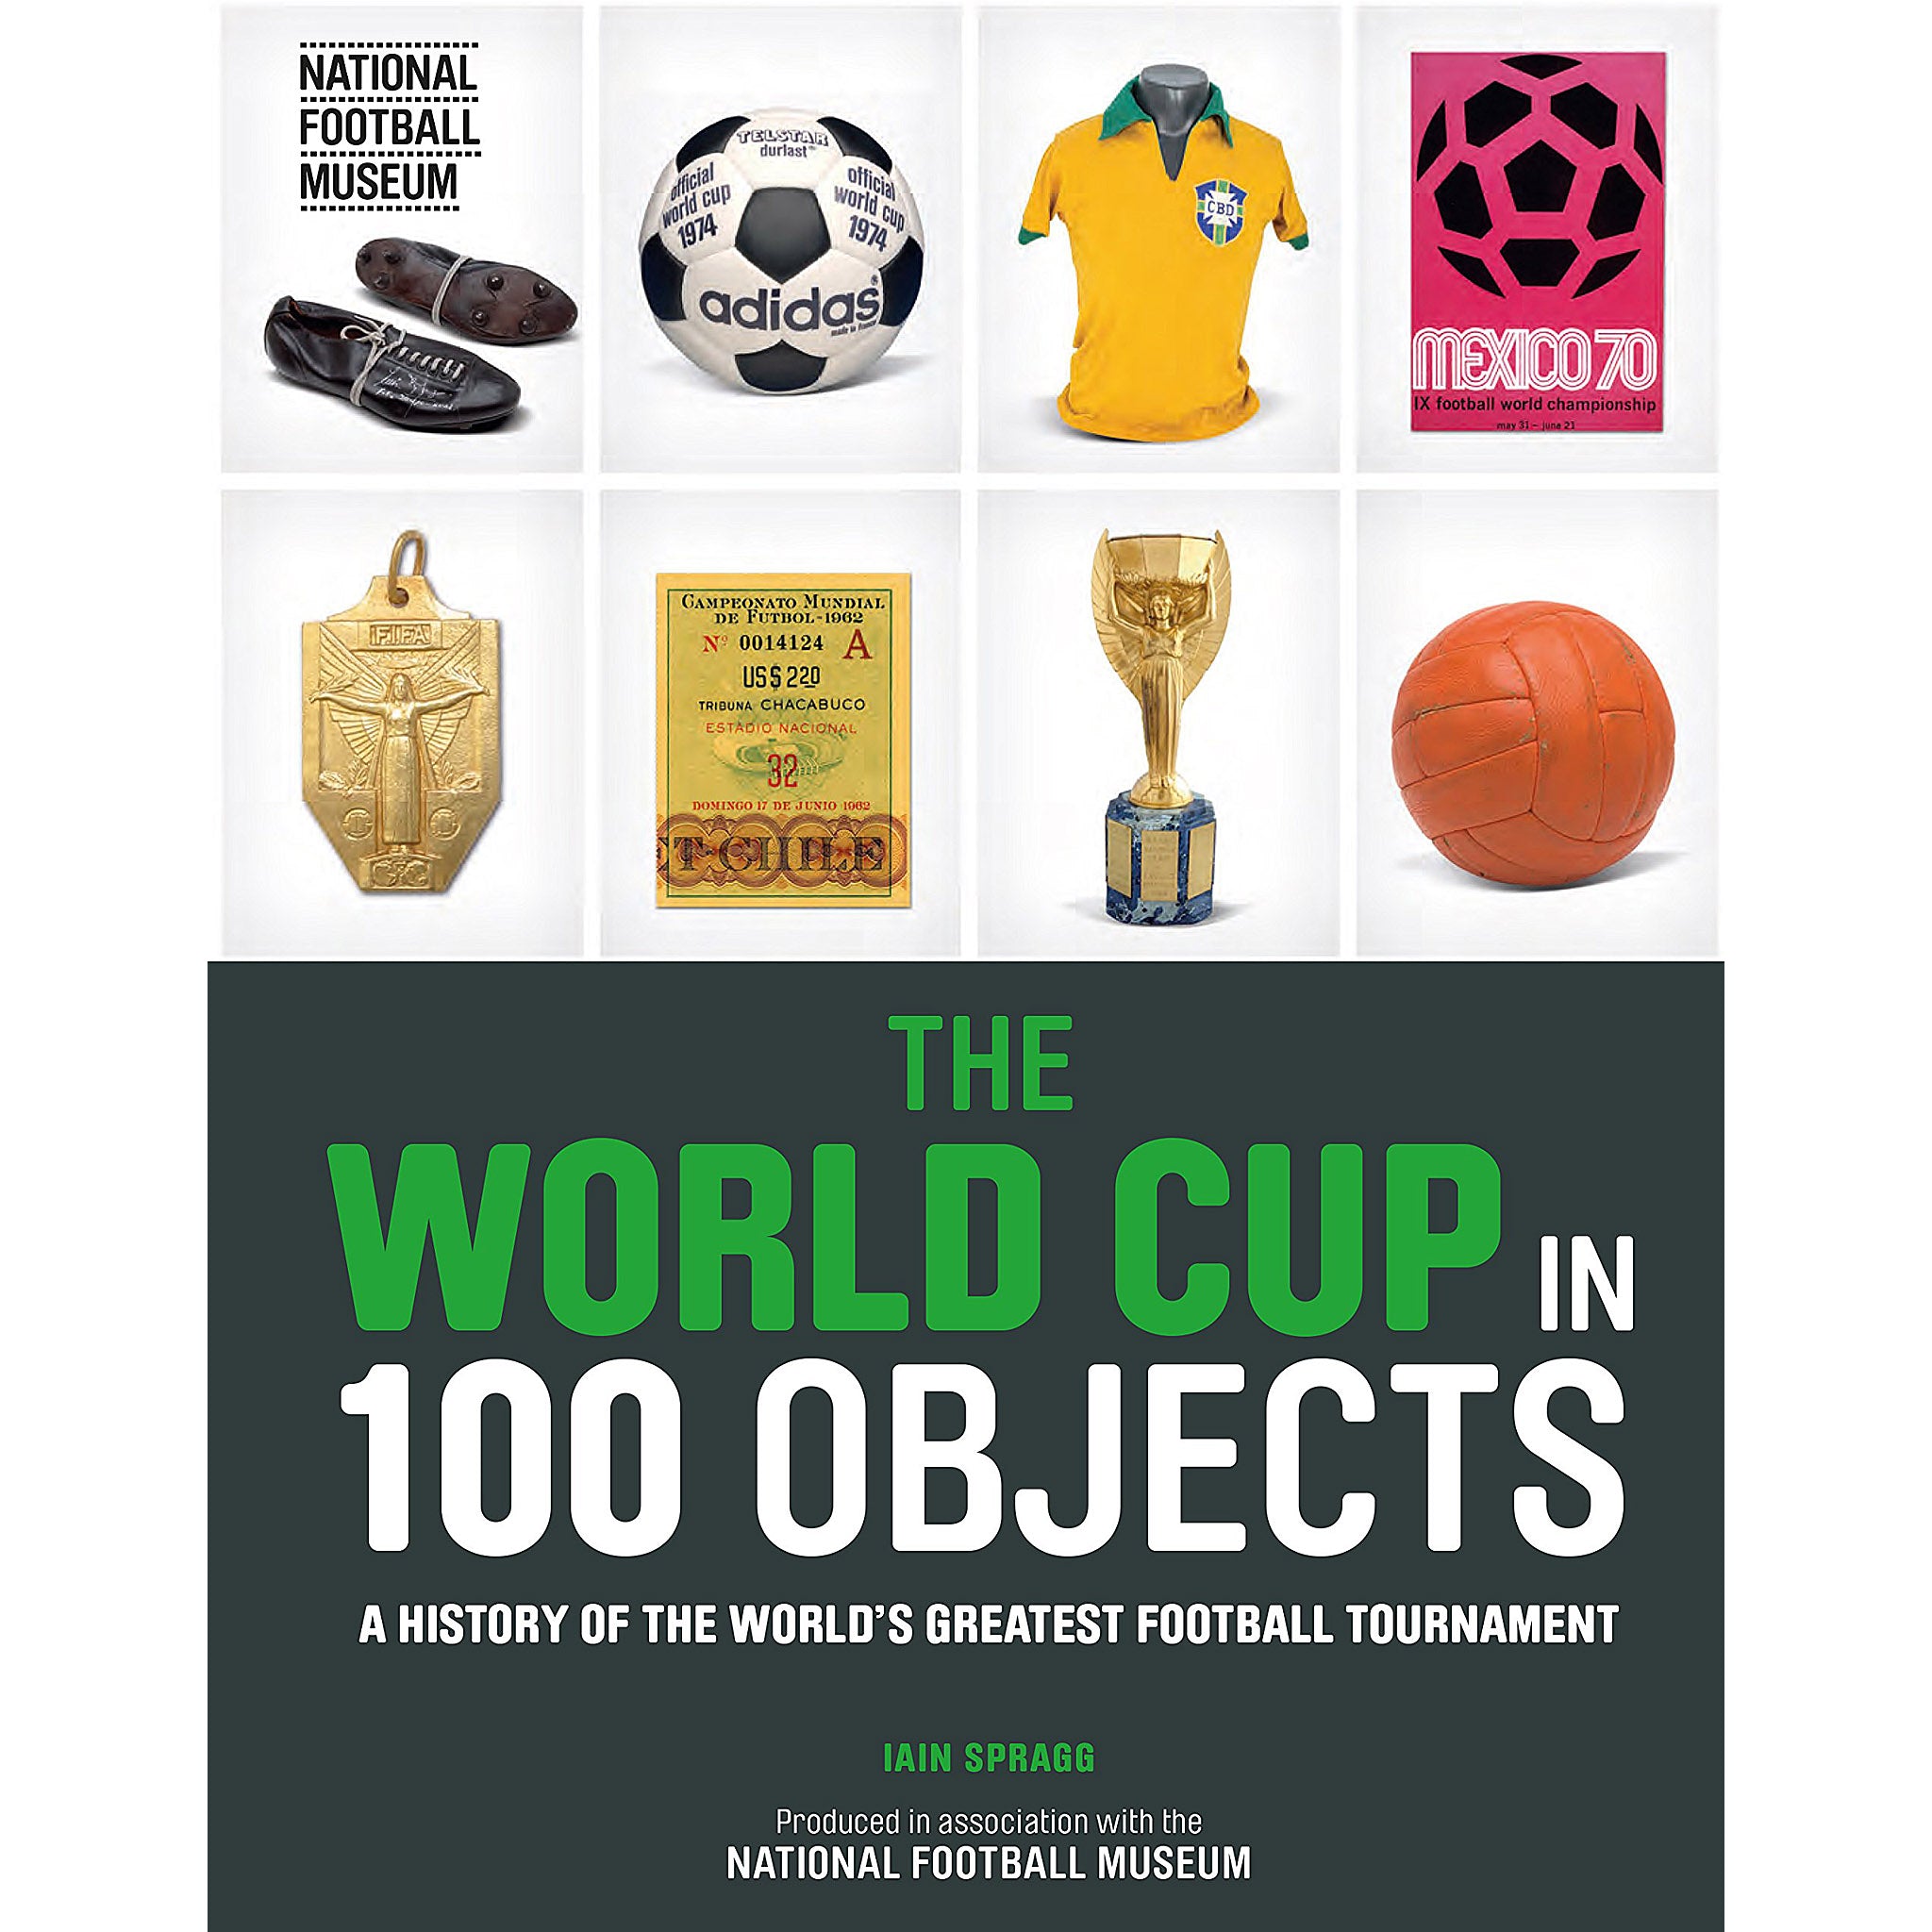 The World Cup in 100 Objects – A History of the World's Greatest Football Tournament